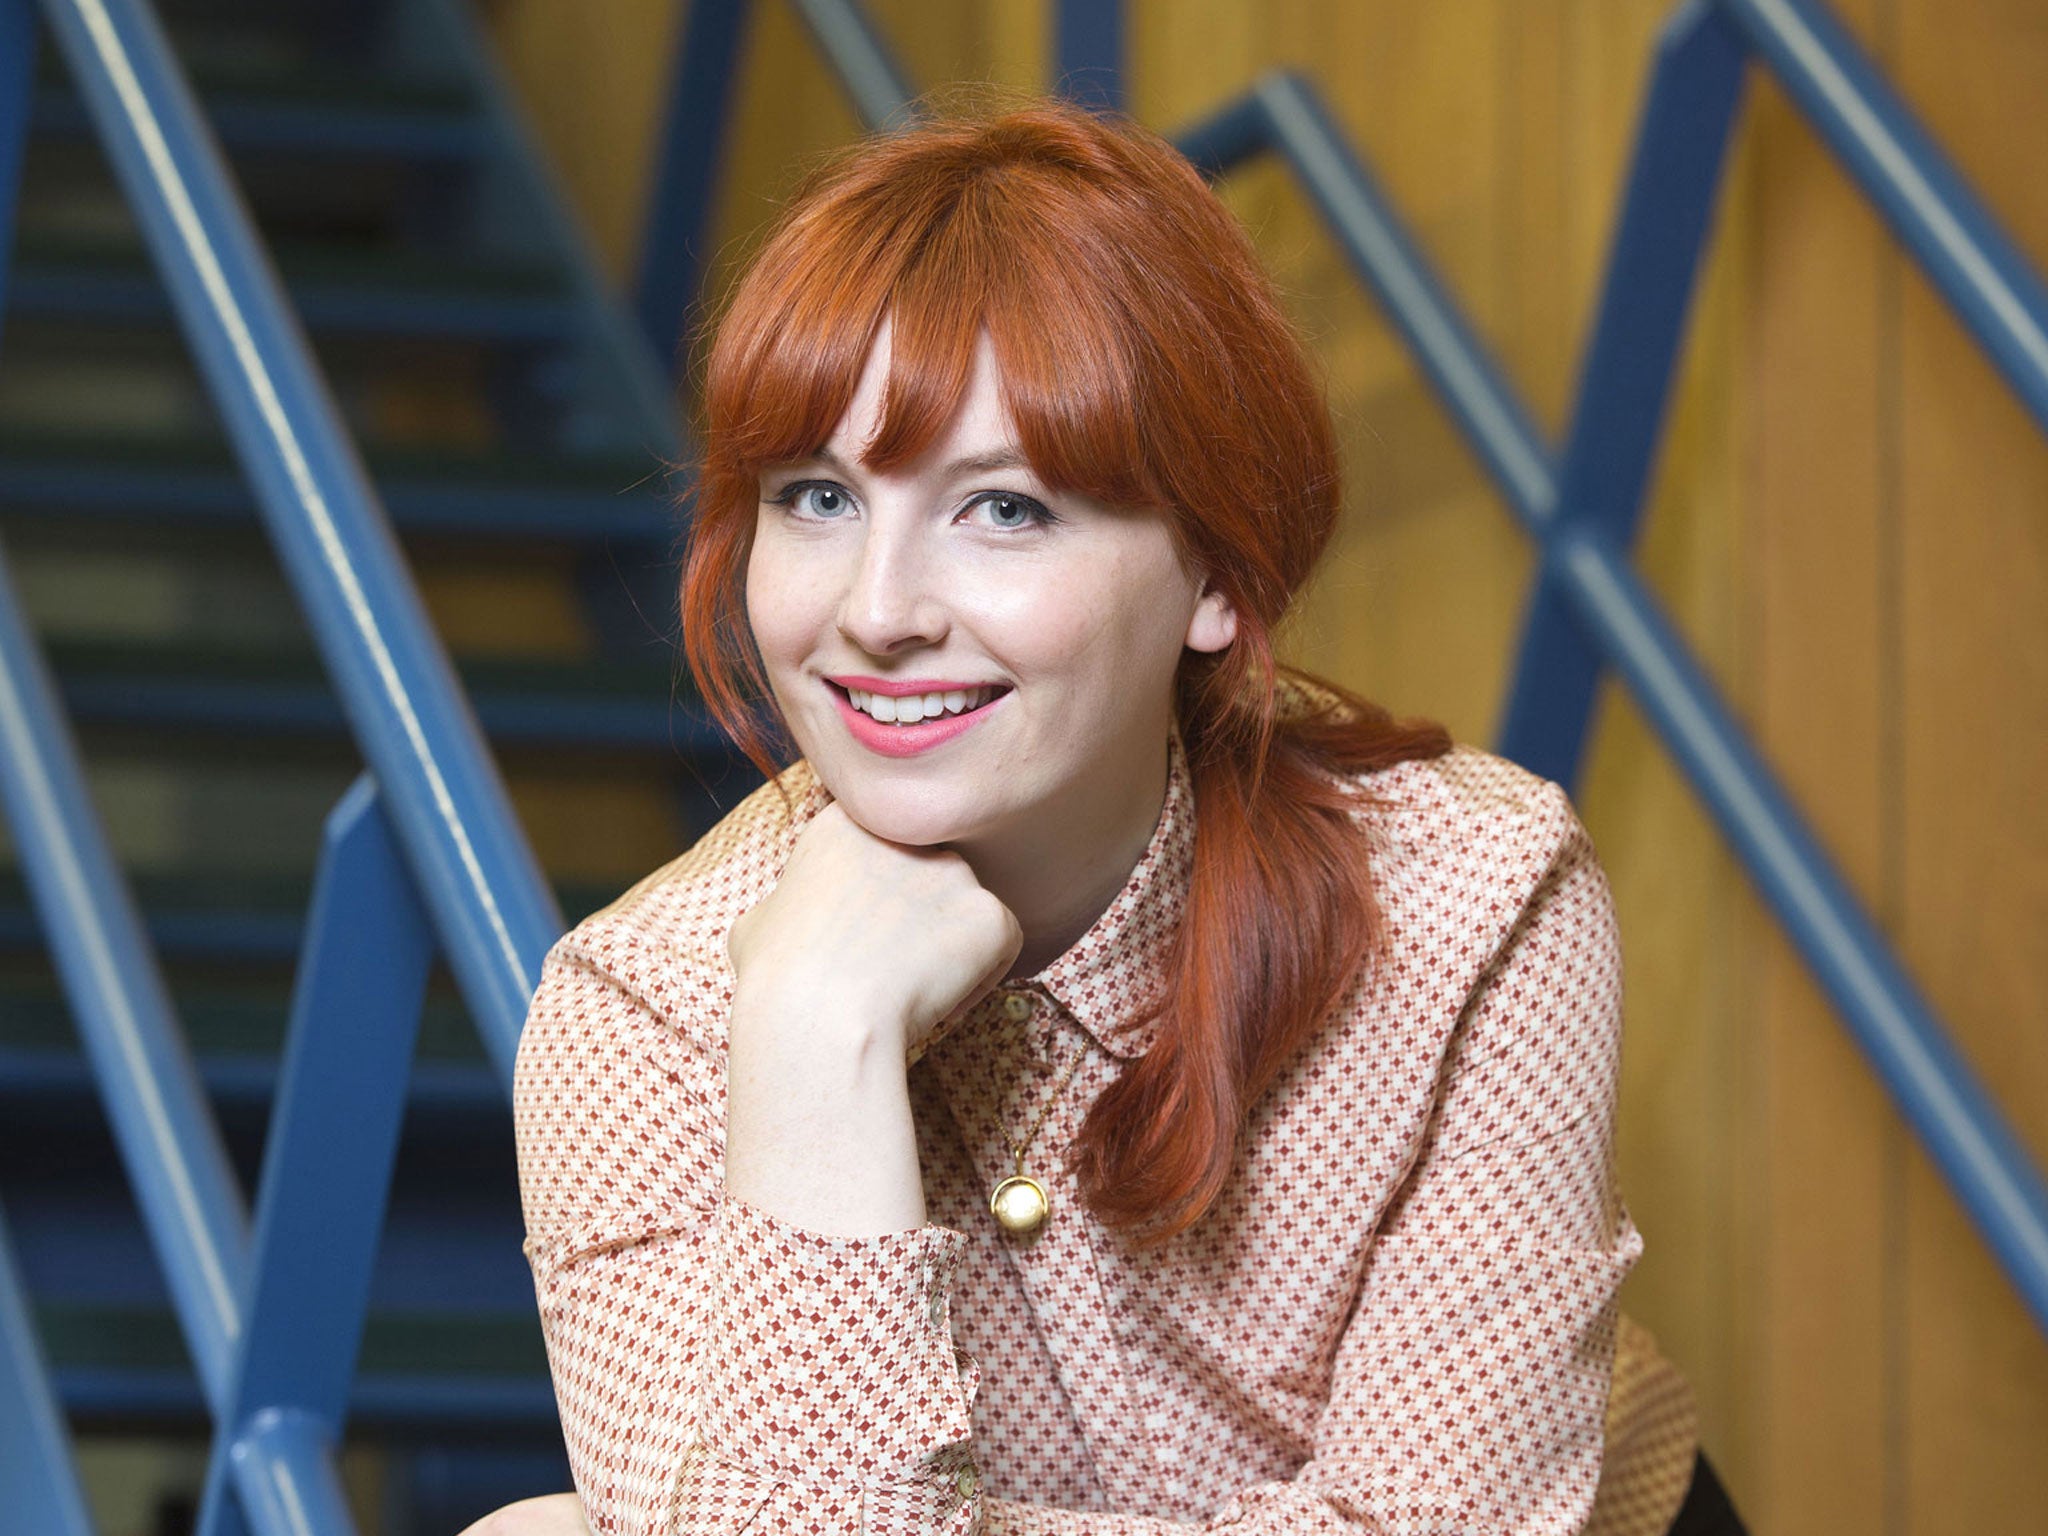 Early Teen Facial - Alice Levine interview: The Radio 1 DJ on saucy podcast My Dad Wrote a Porno  | The Independent | The Independent